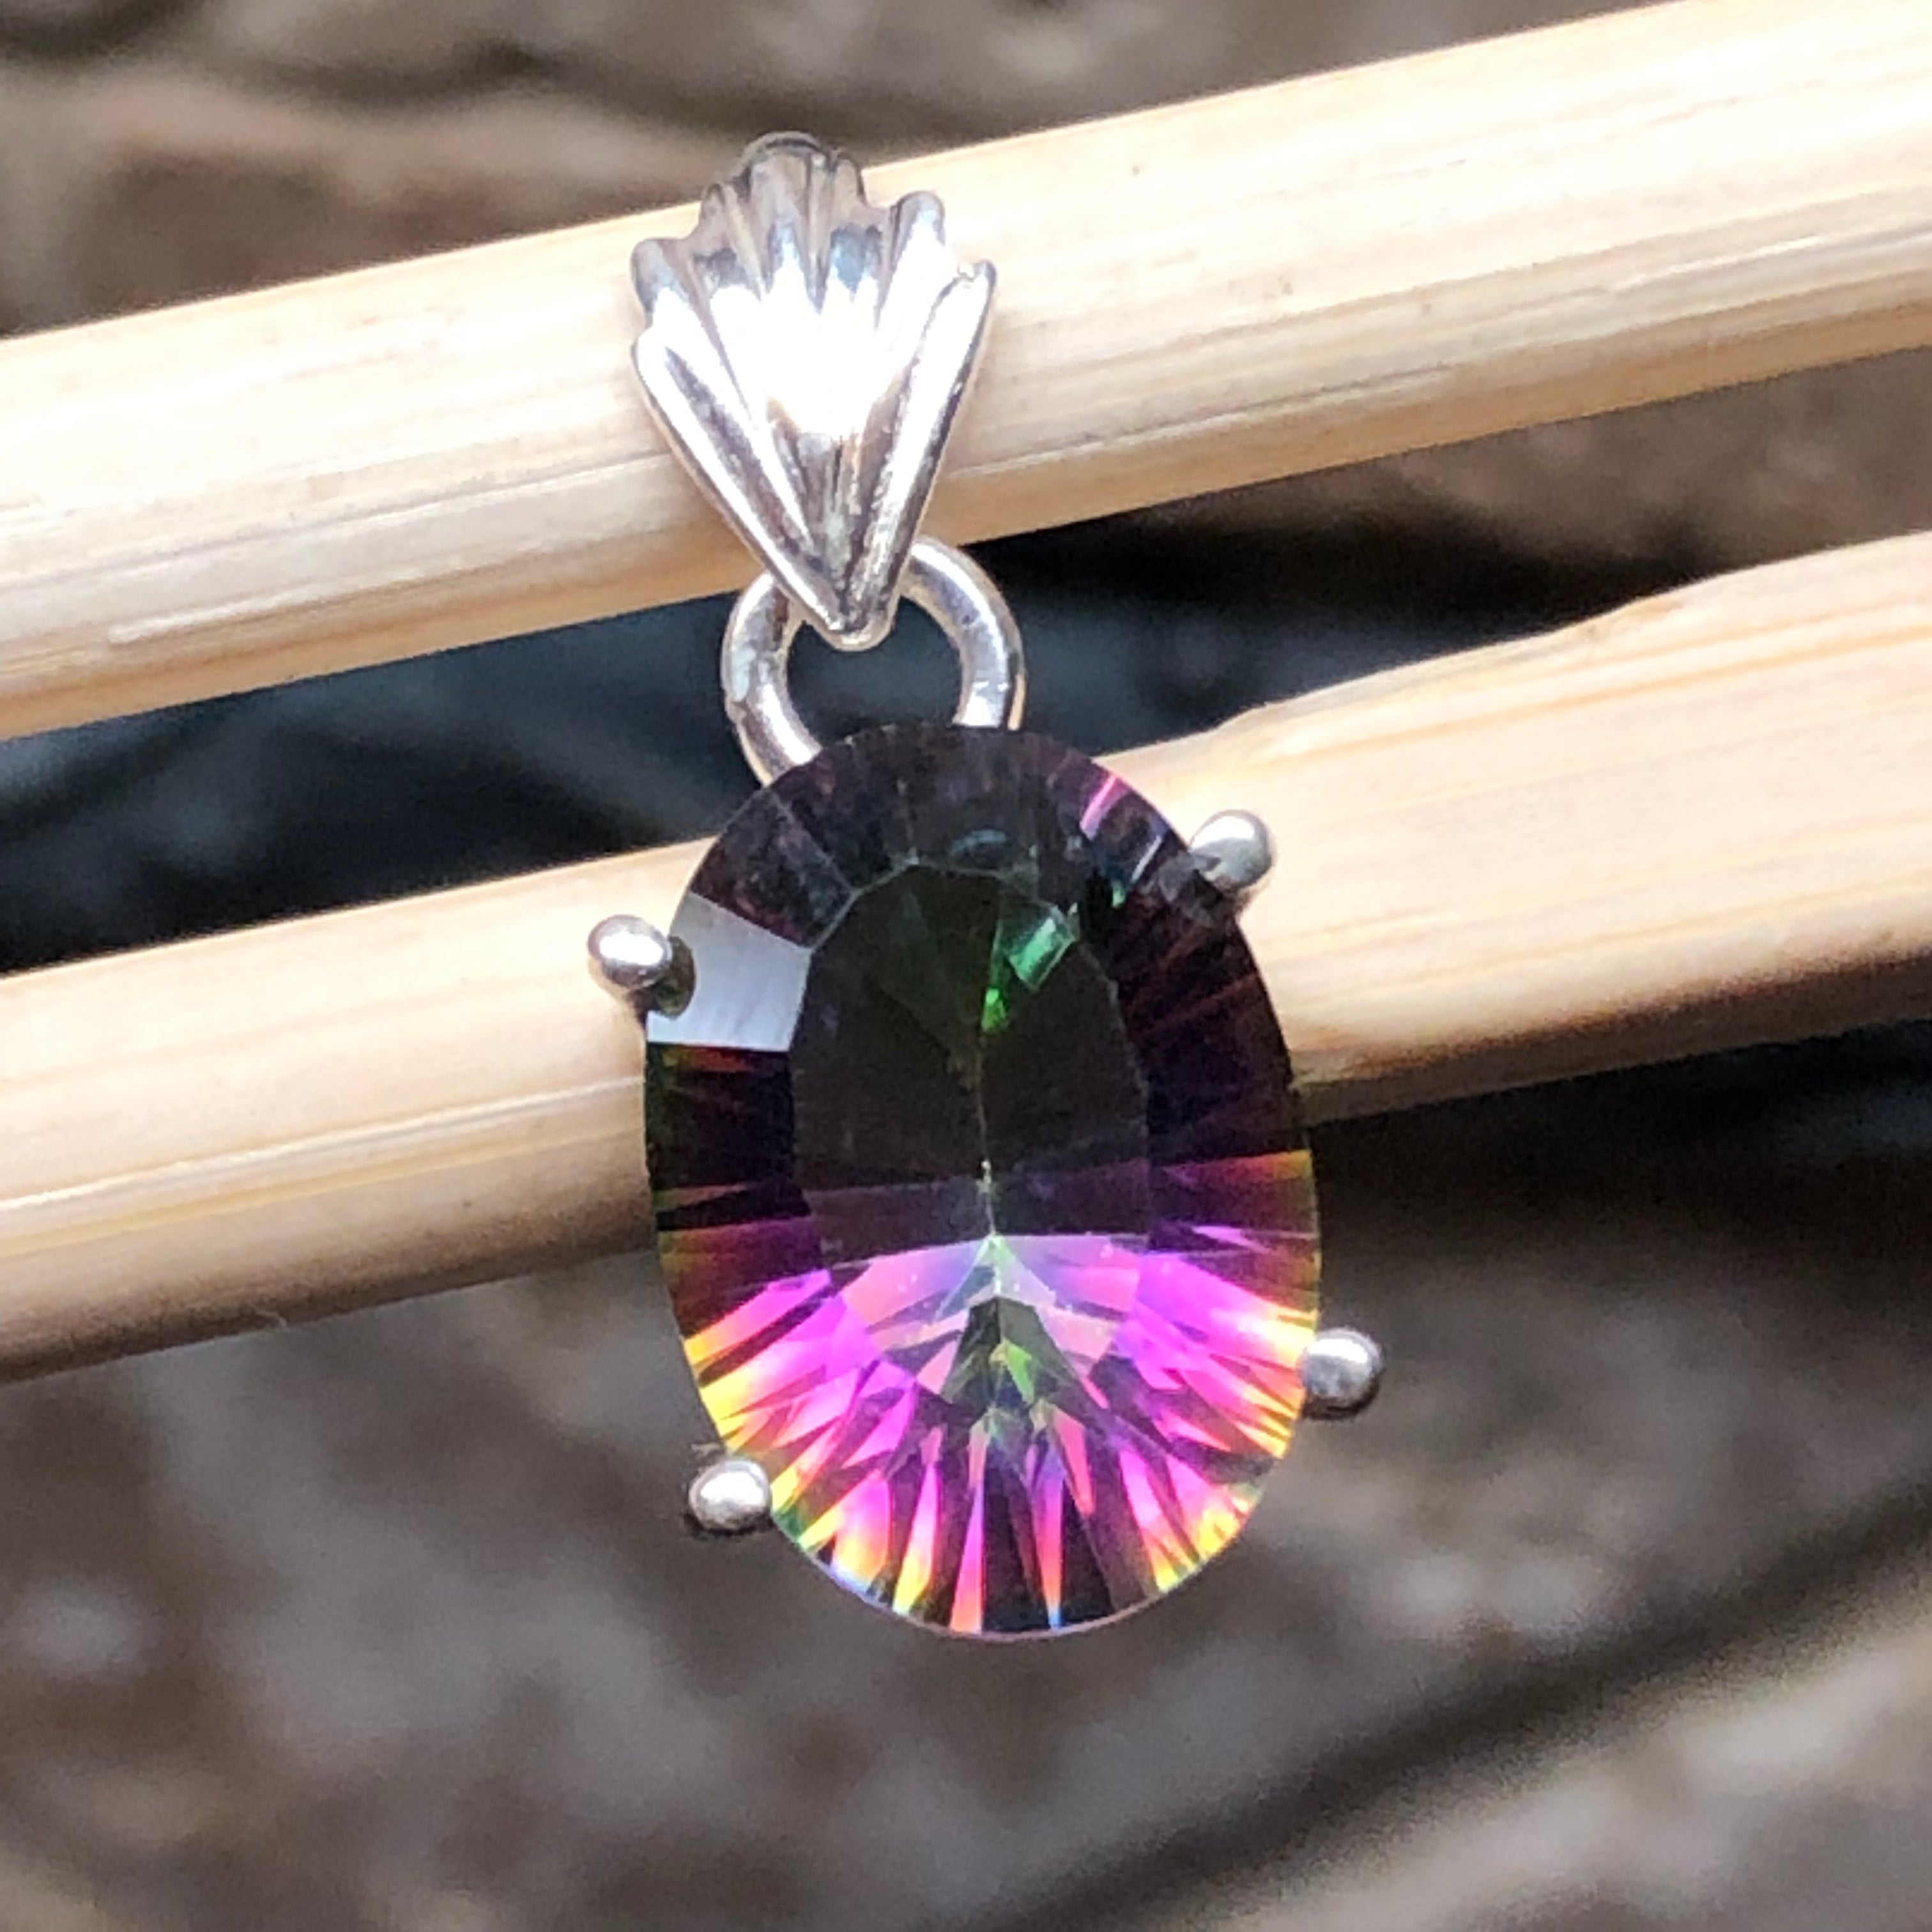 6ct Rainbow Mystic Topaz 925 Solid Sterling Silve Pendant 22mm - Natural Rocks by Kala